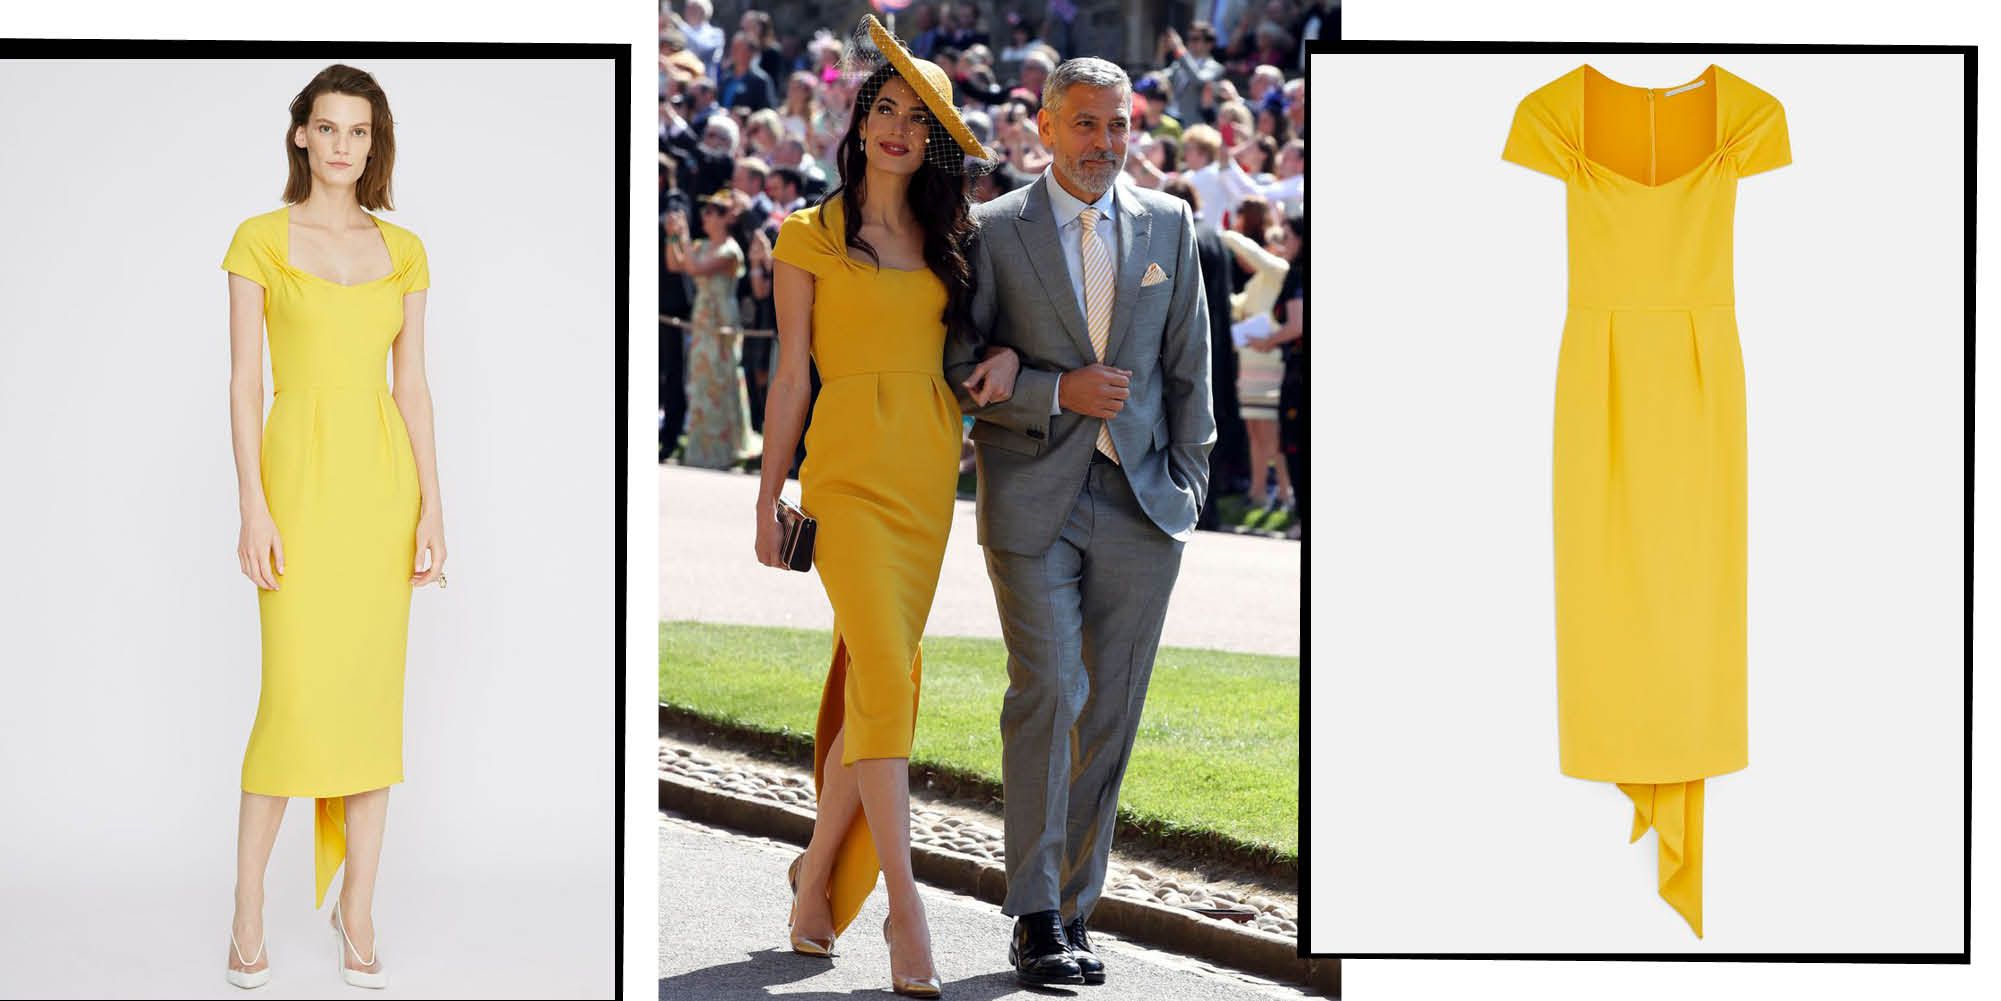 Amal Clooney looks beautiful in yellow for the royal wedding | Royal wedding  guests outfits, White pencil dress, Fashion